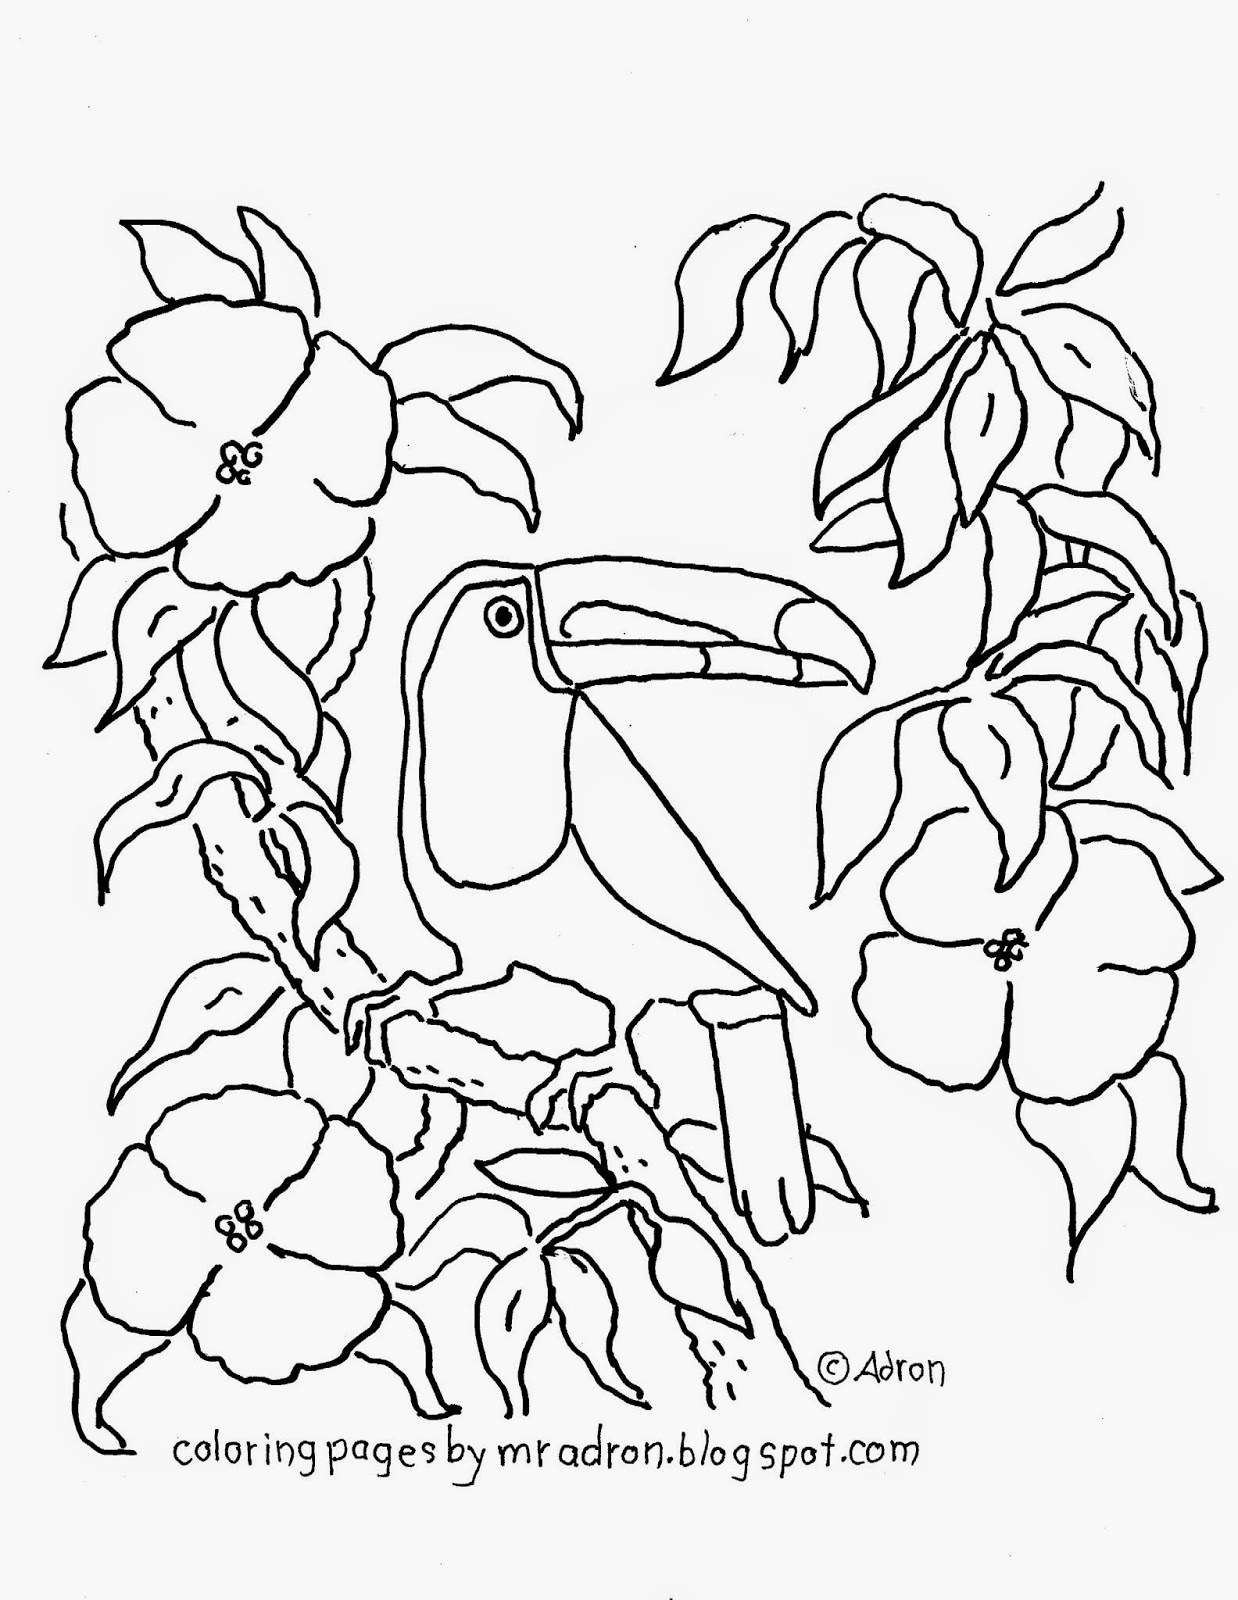 Coloring Pages for Kids by Mr. Adron: Free Printable Toucan Coloring Page